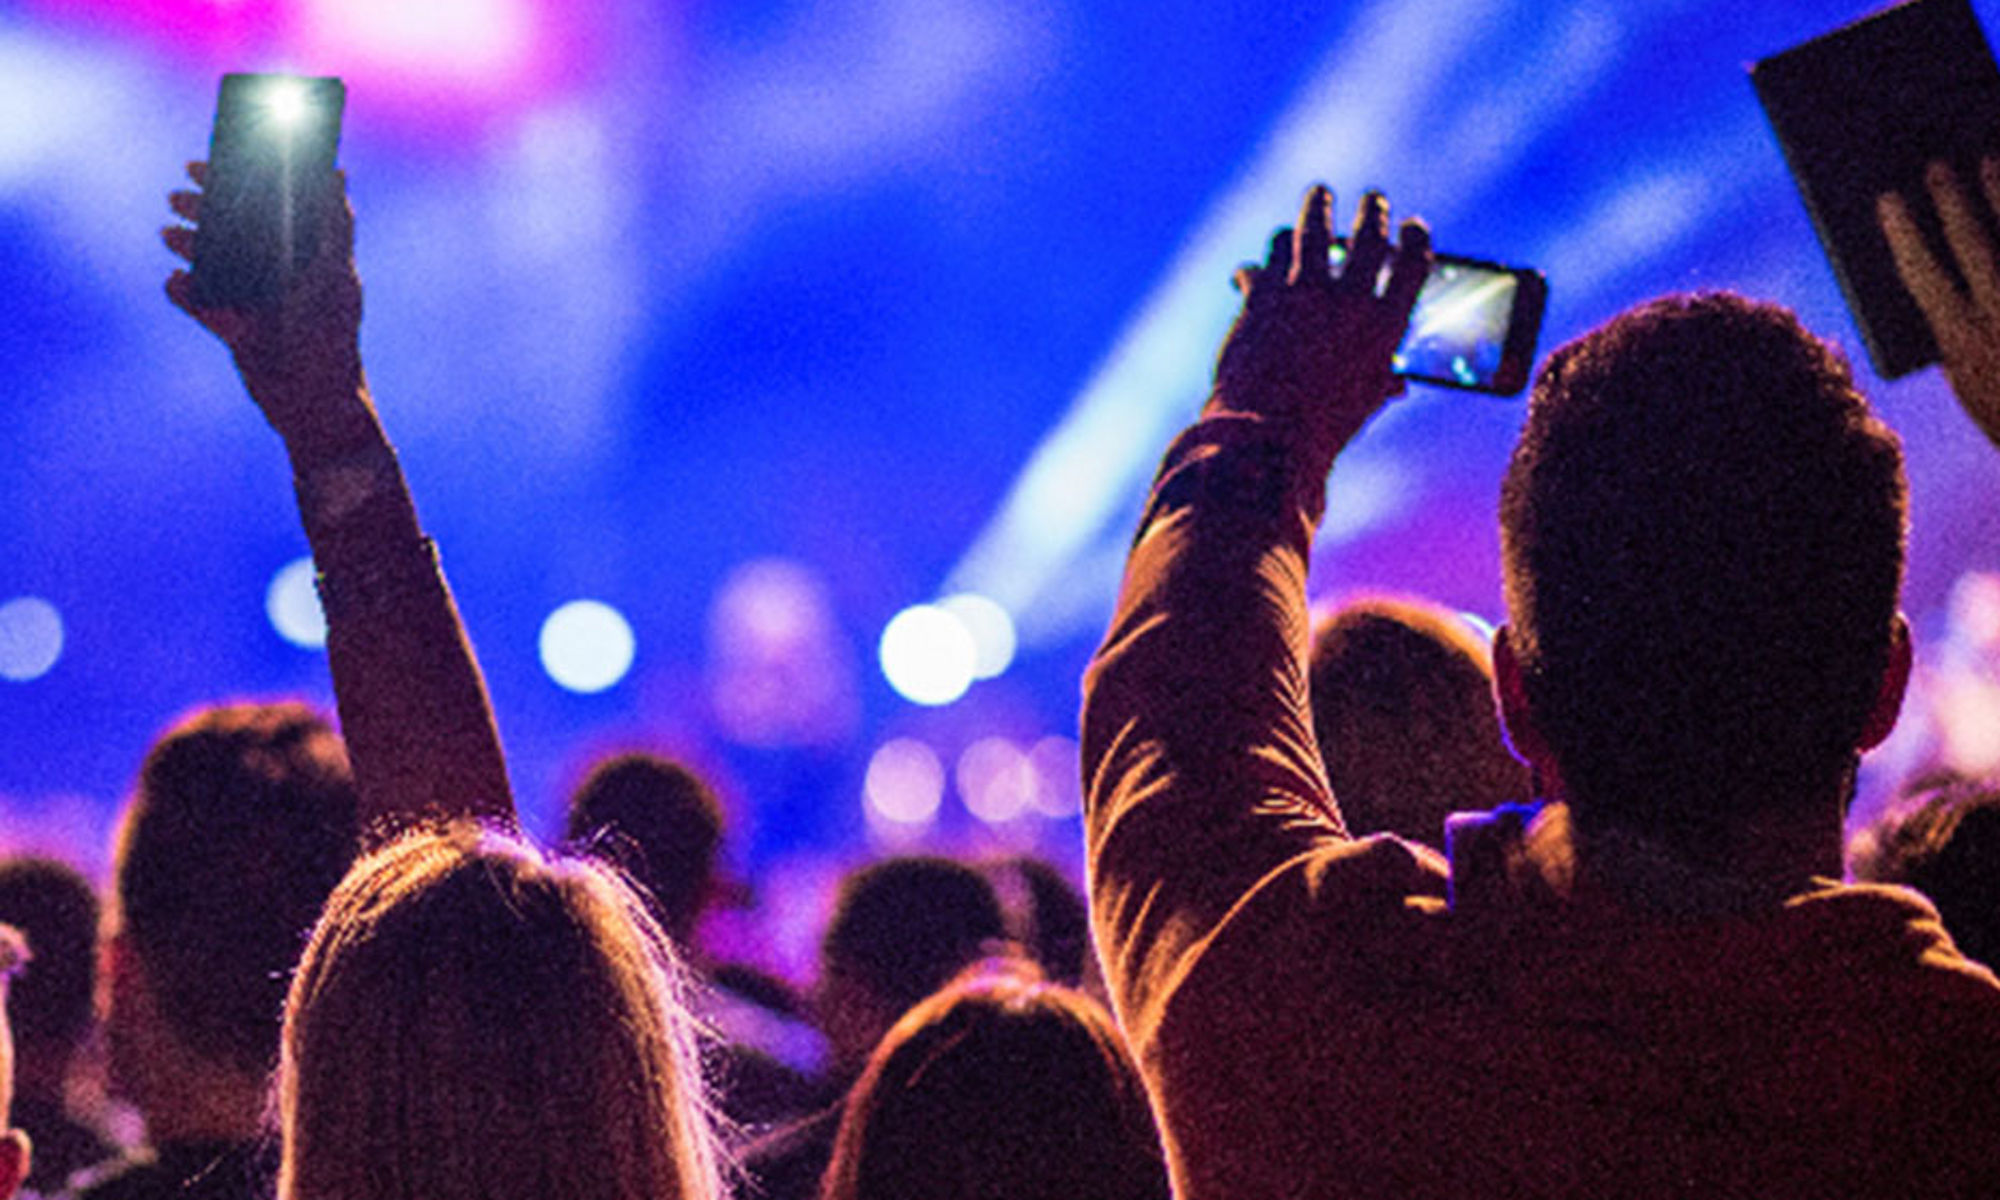 crowd of people at concert holding phones